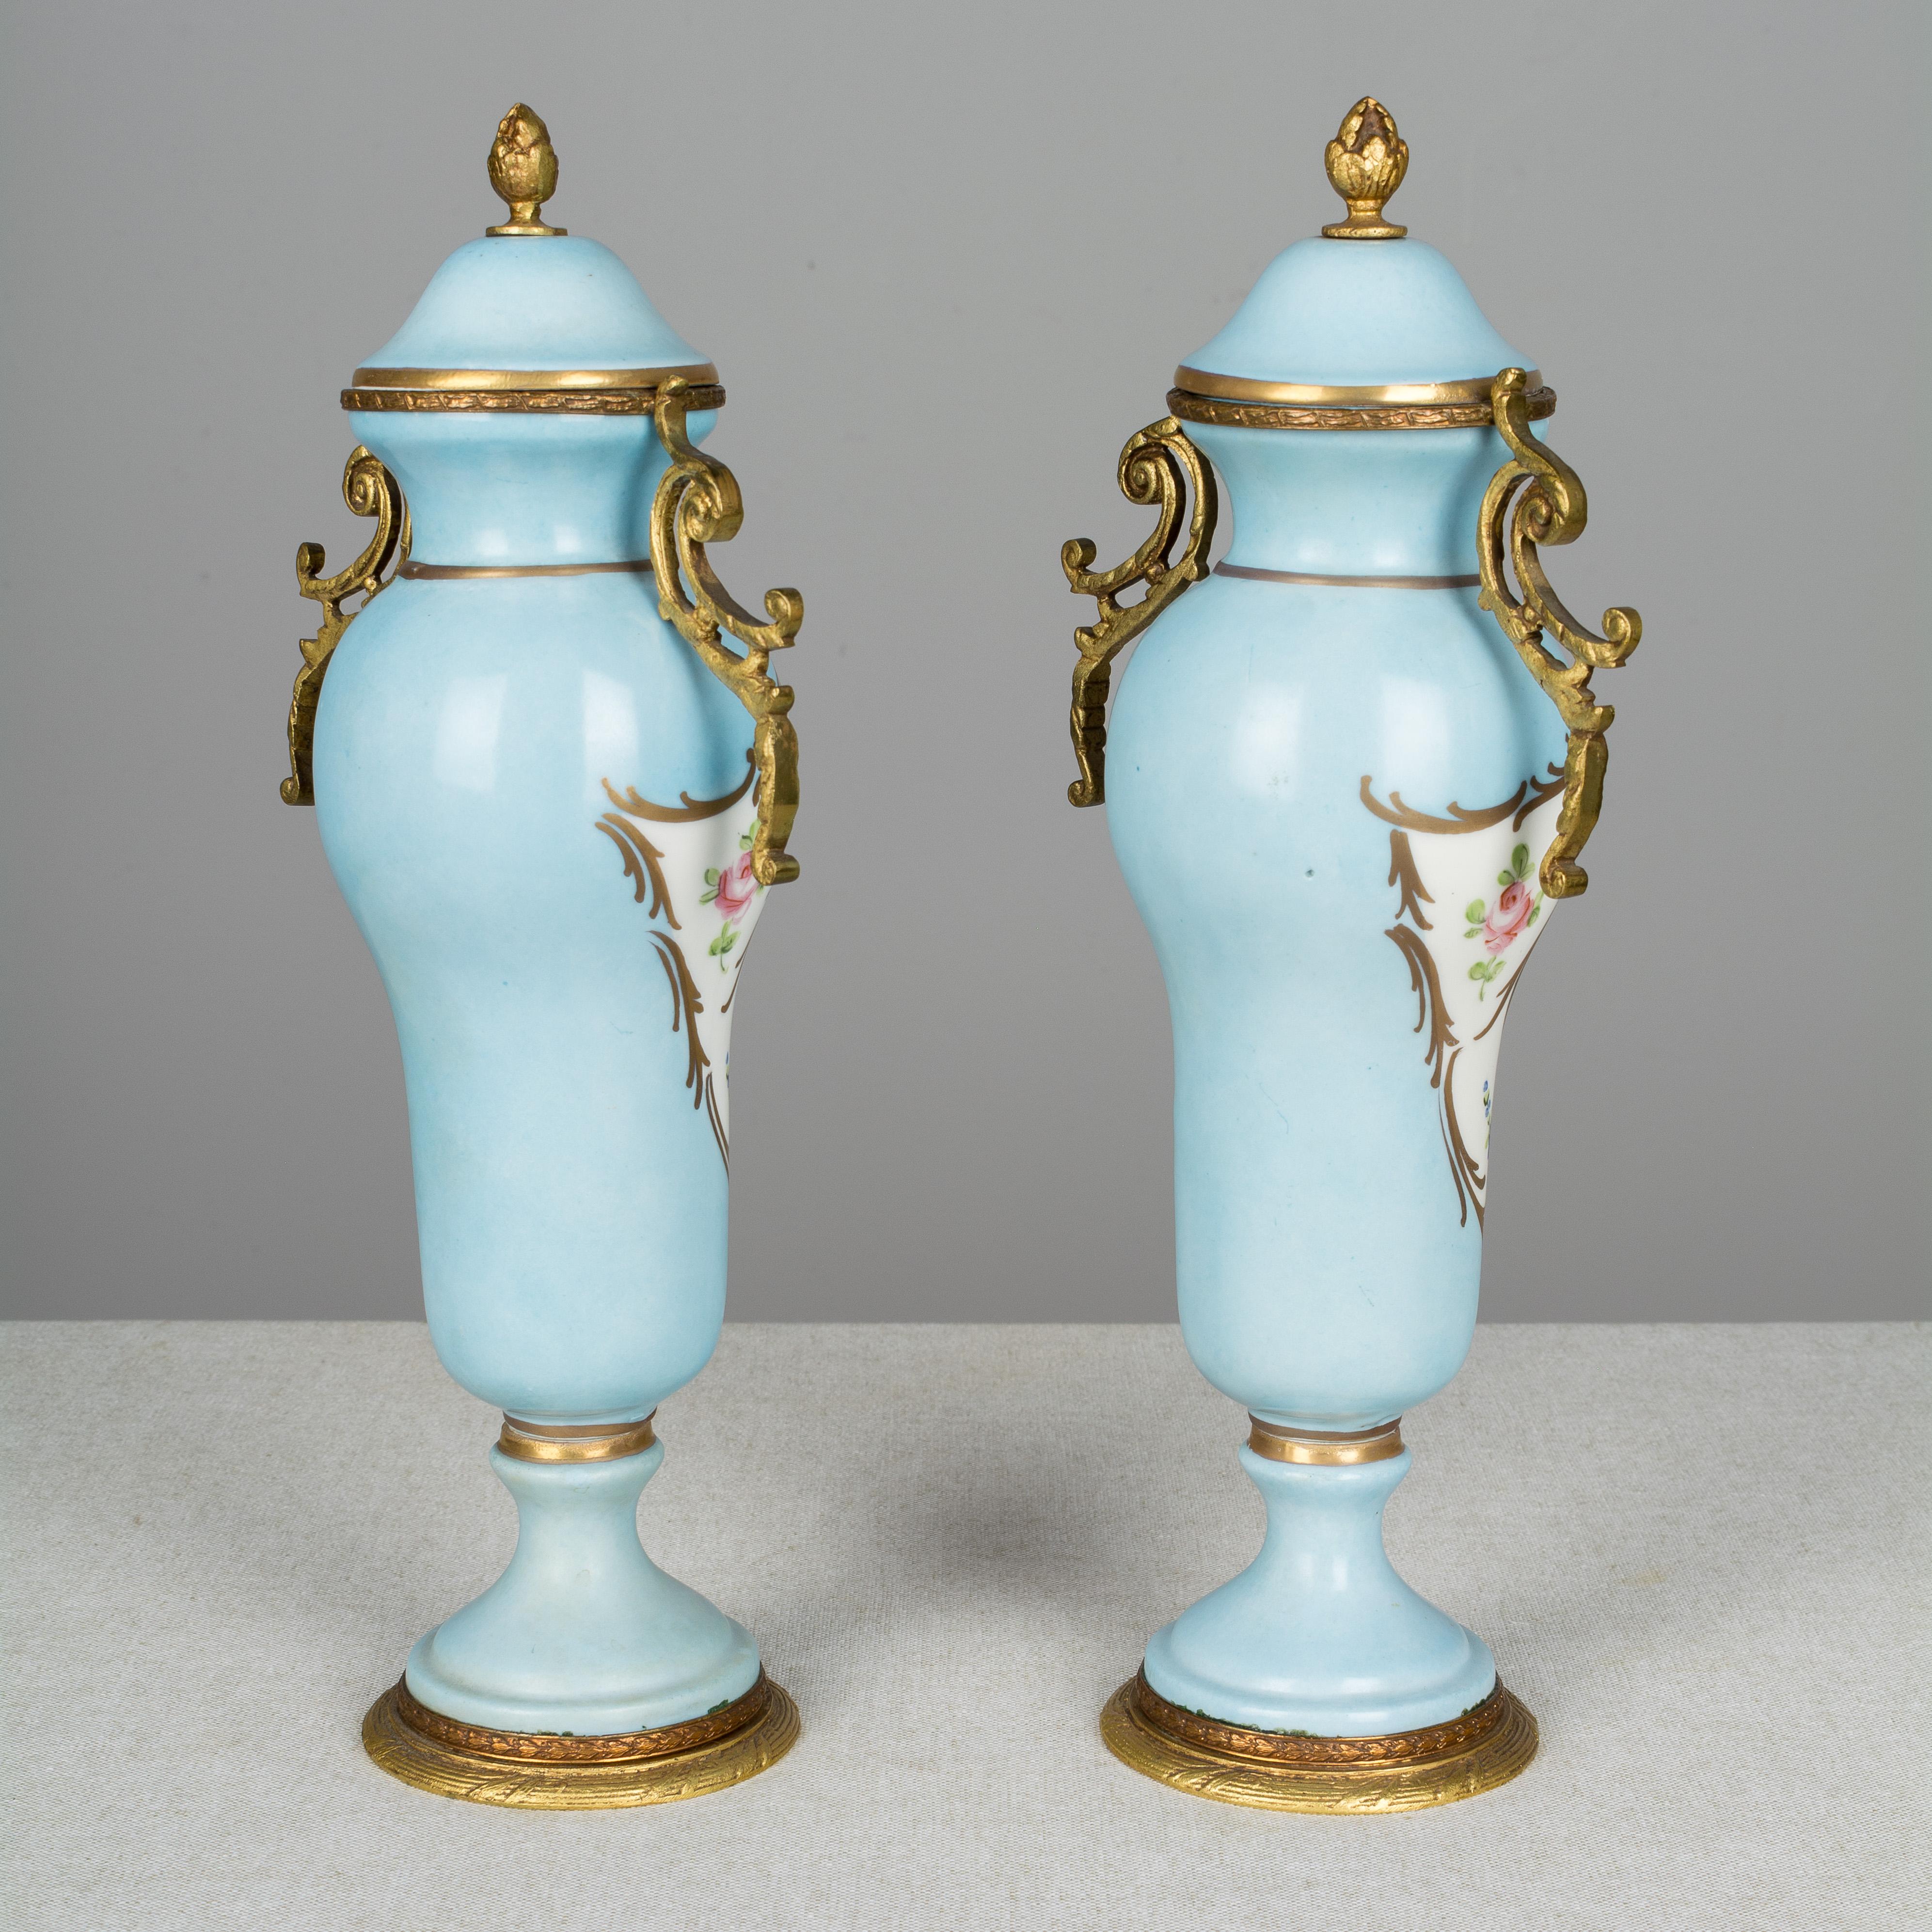 Bronze Pair of French Sèvres Porcelain Urns